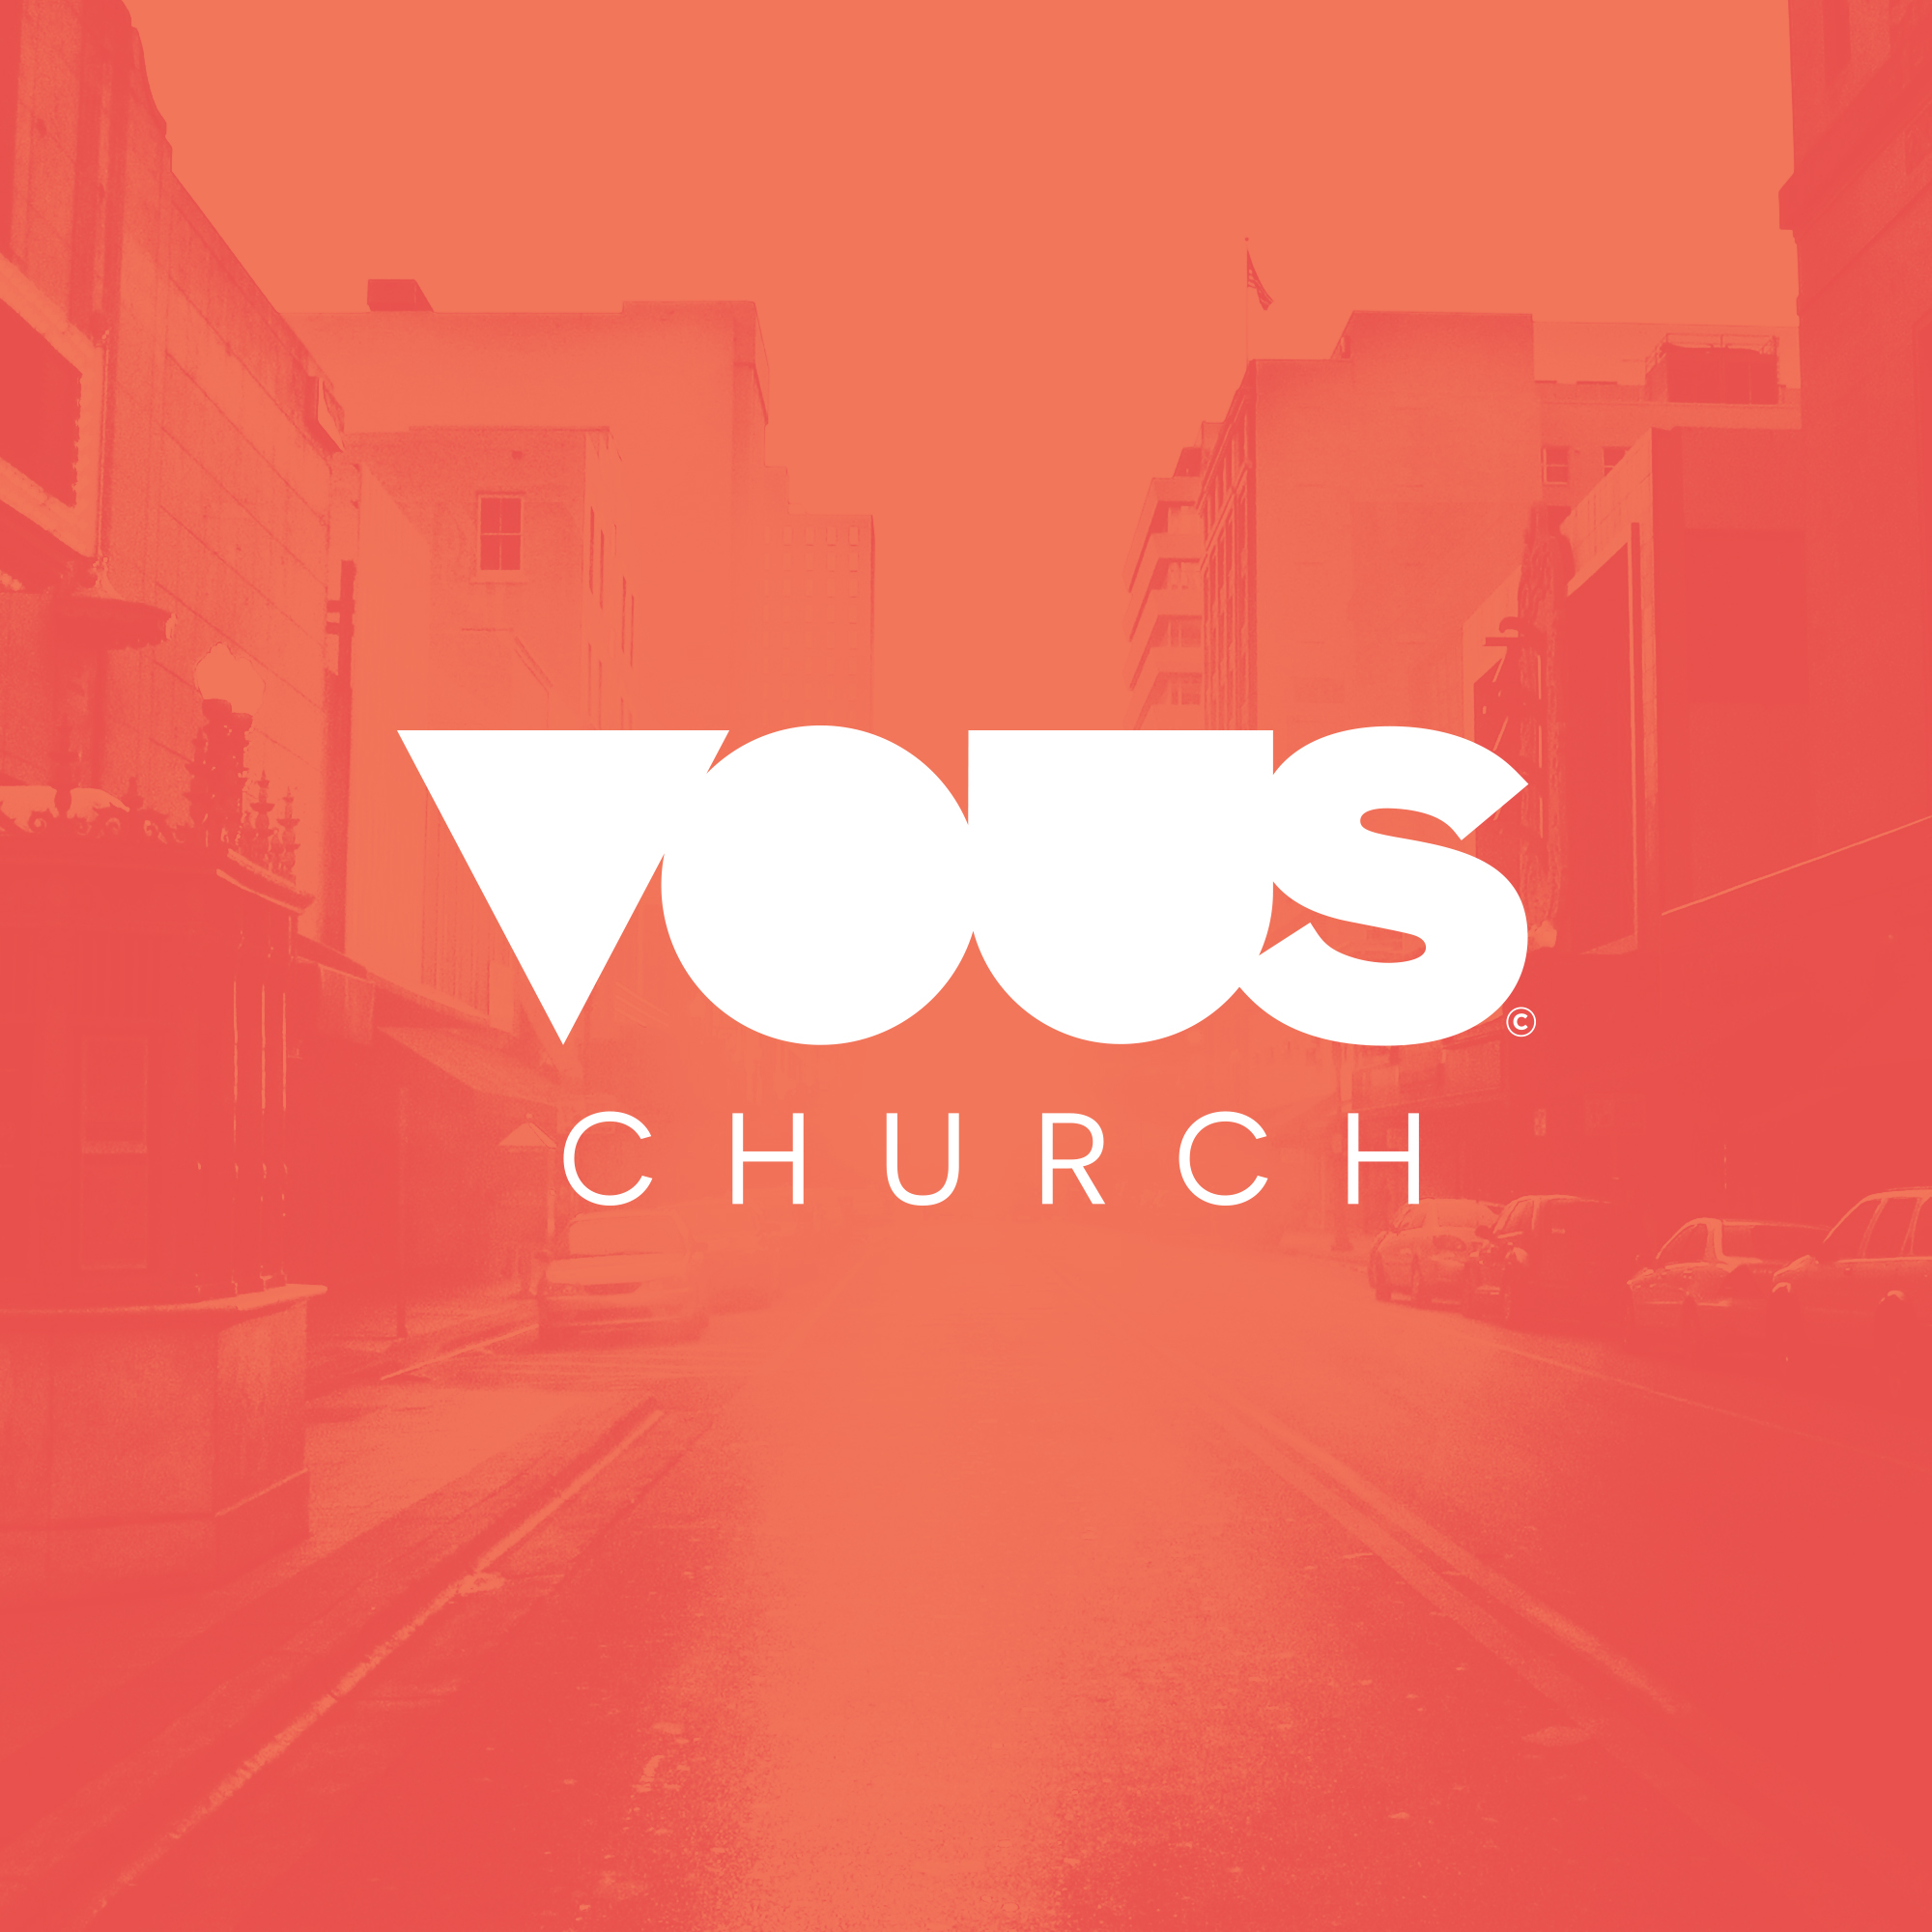 Chad Veach — When Life Doesn't Work Out / VOUS Conference 2018